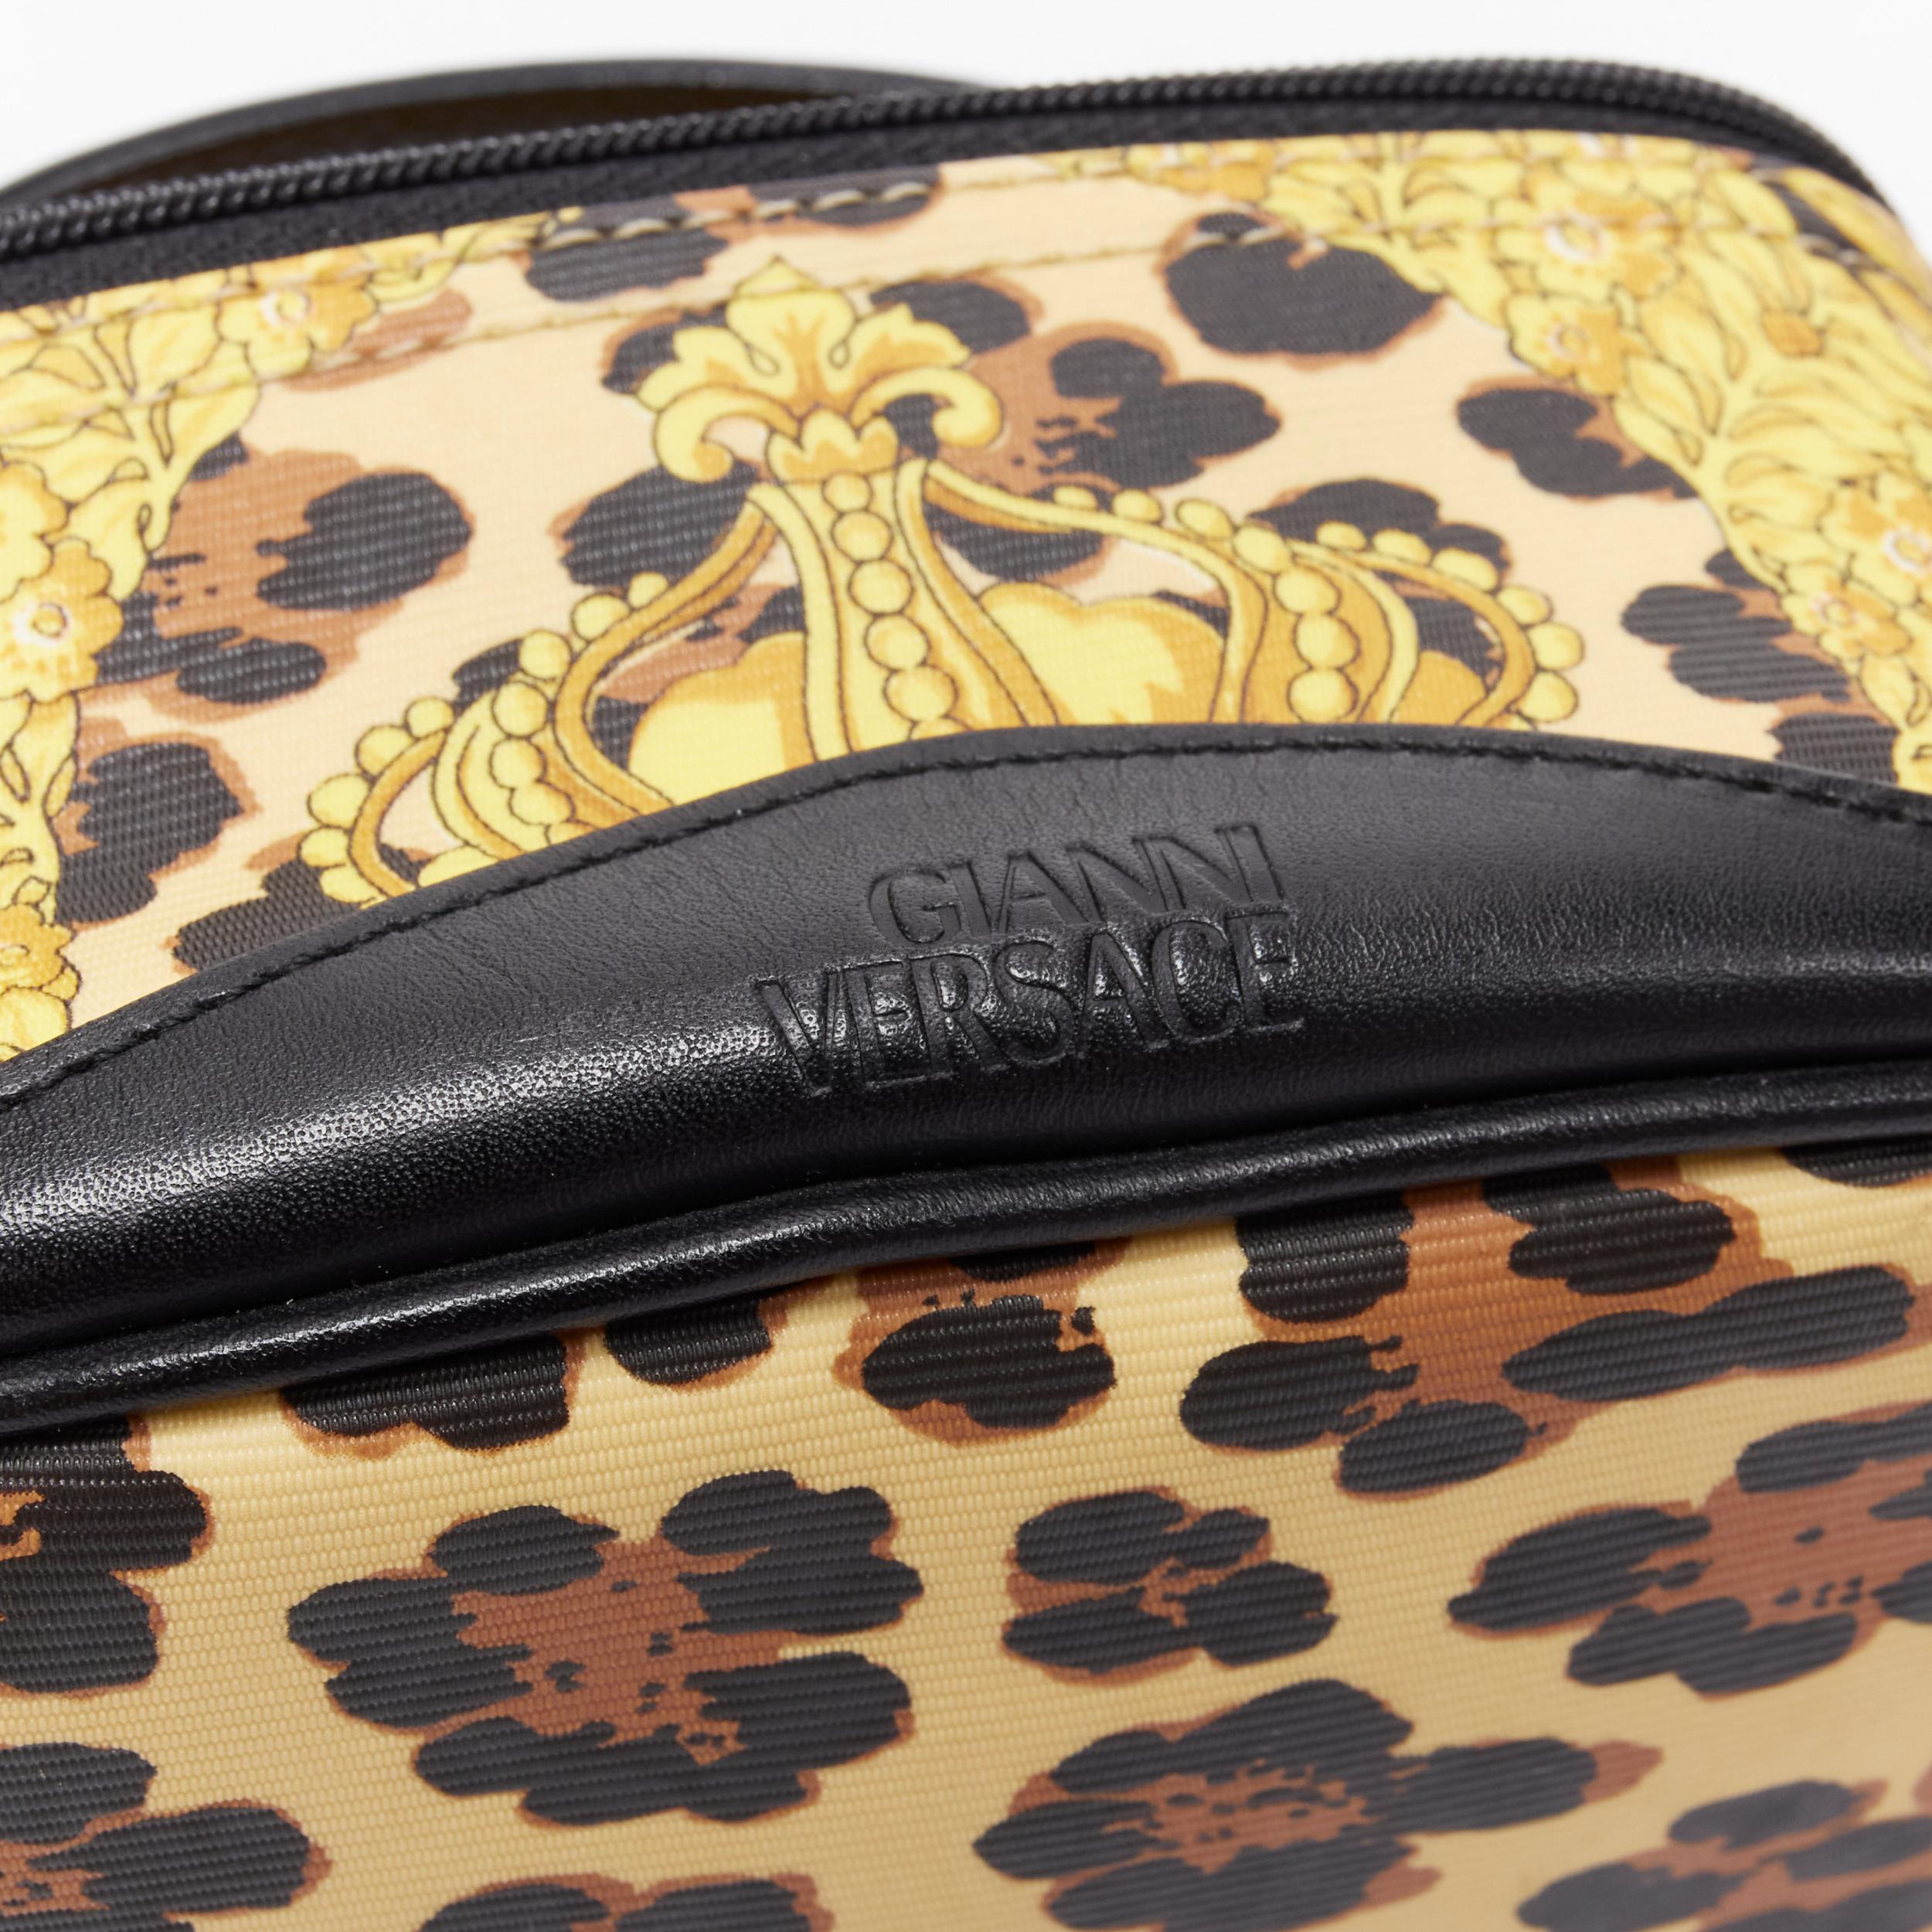 GIANNI VERSACE gold barocco baroque leopard print leather top handle micro bag For Sale 1